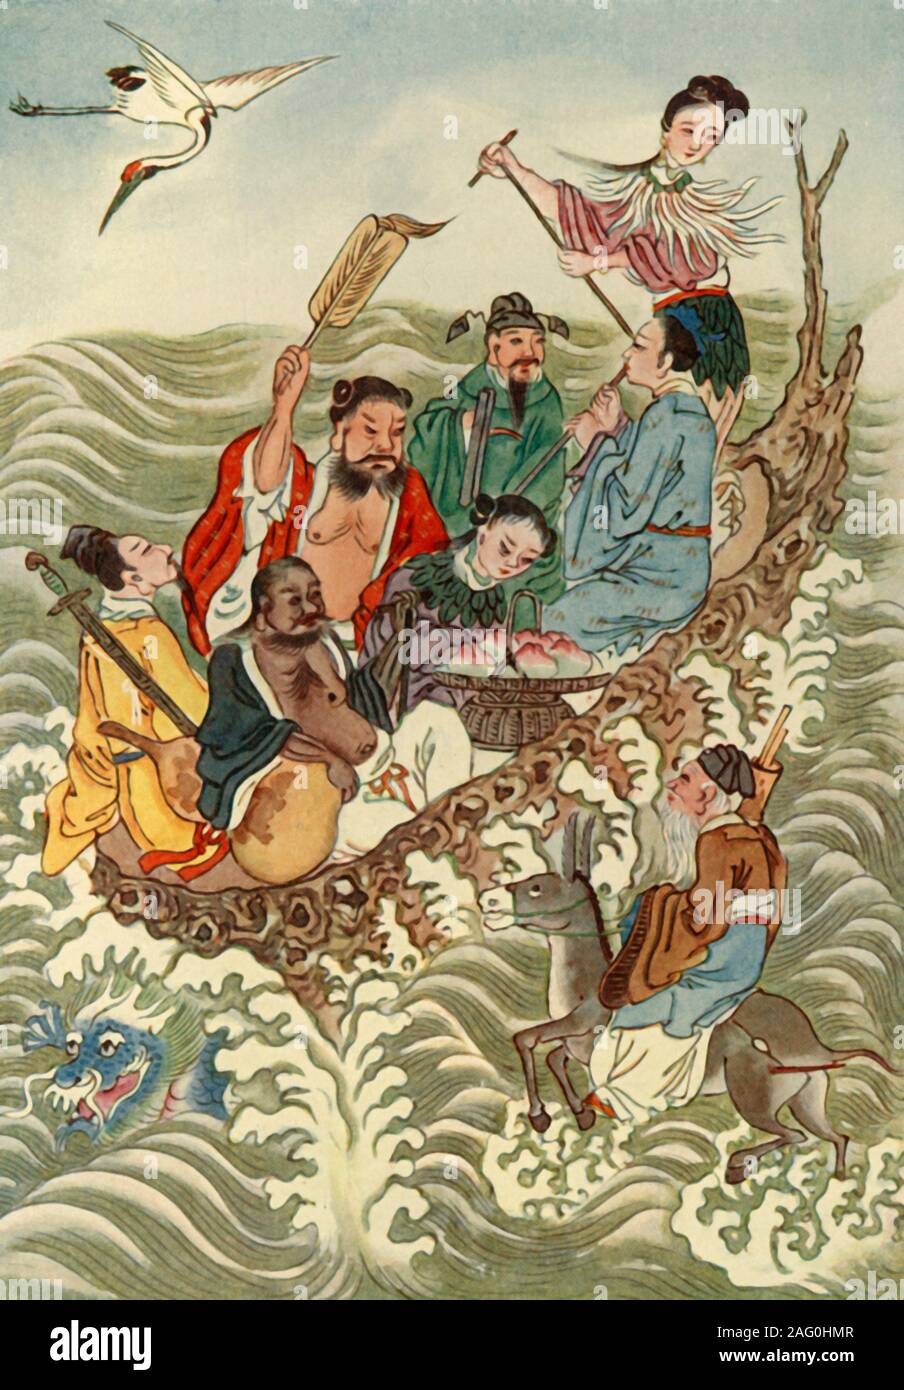 'The Eight Immortals Crossing the Sea', 1922. The Eight Immortals are revered by Taoists and are a popular element of Chinese culture. They are said to live on a group of five islands in the Bohai Sea,   From &quot;Myths and Legends of China&quot;, by E. T. C. Werner. [George G. Harrap &amp; Co. Ltd., London, Calcutta, Sydney, 1922] Stock Photo